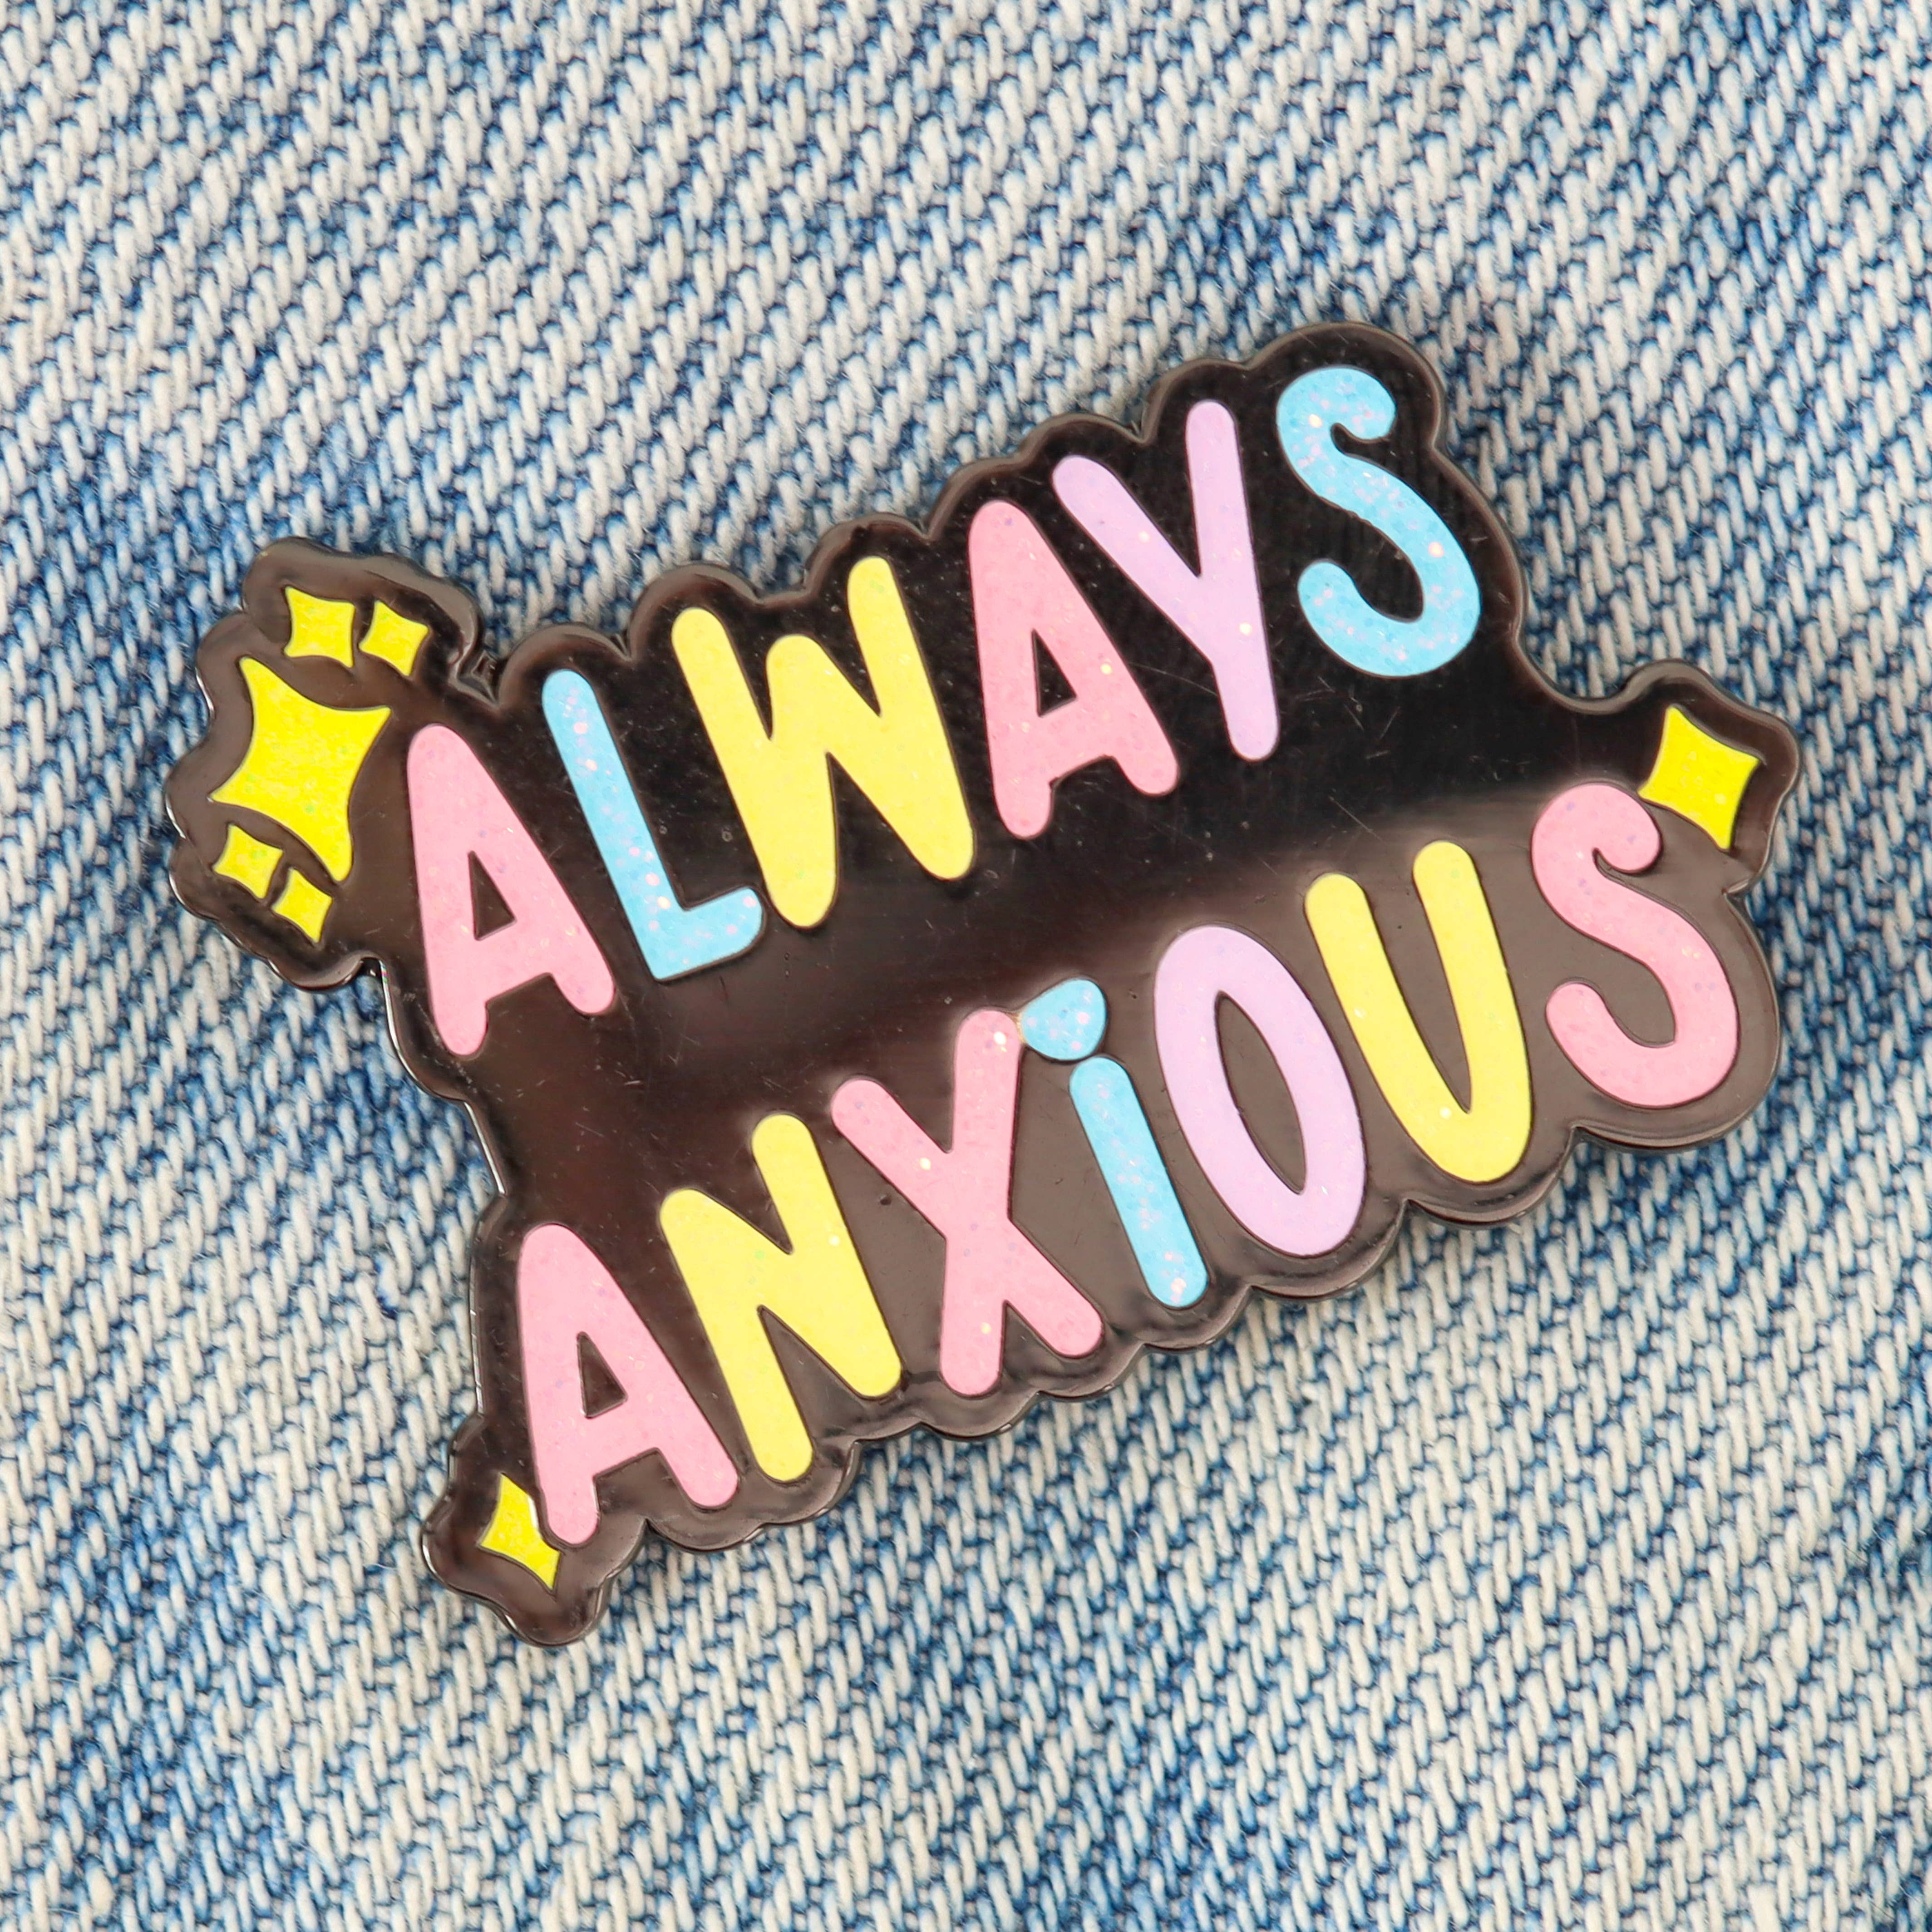 Always anxious enamel pin | Mental health anxiety badge: Without cello bags